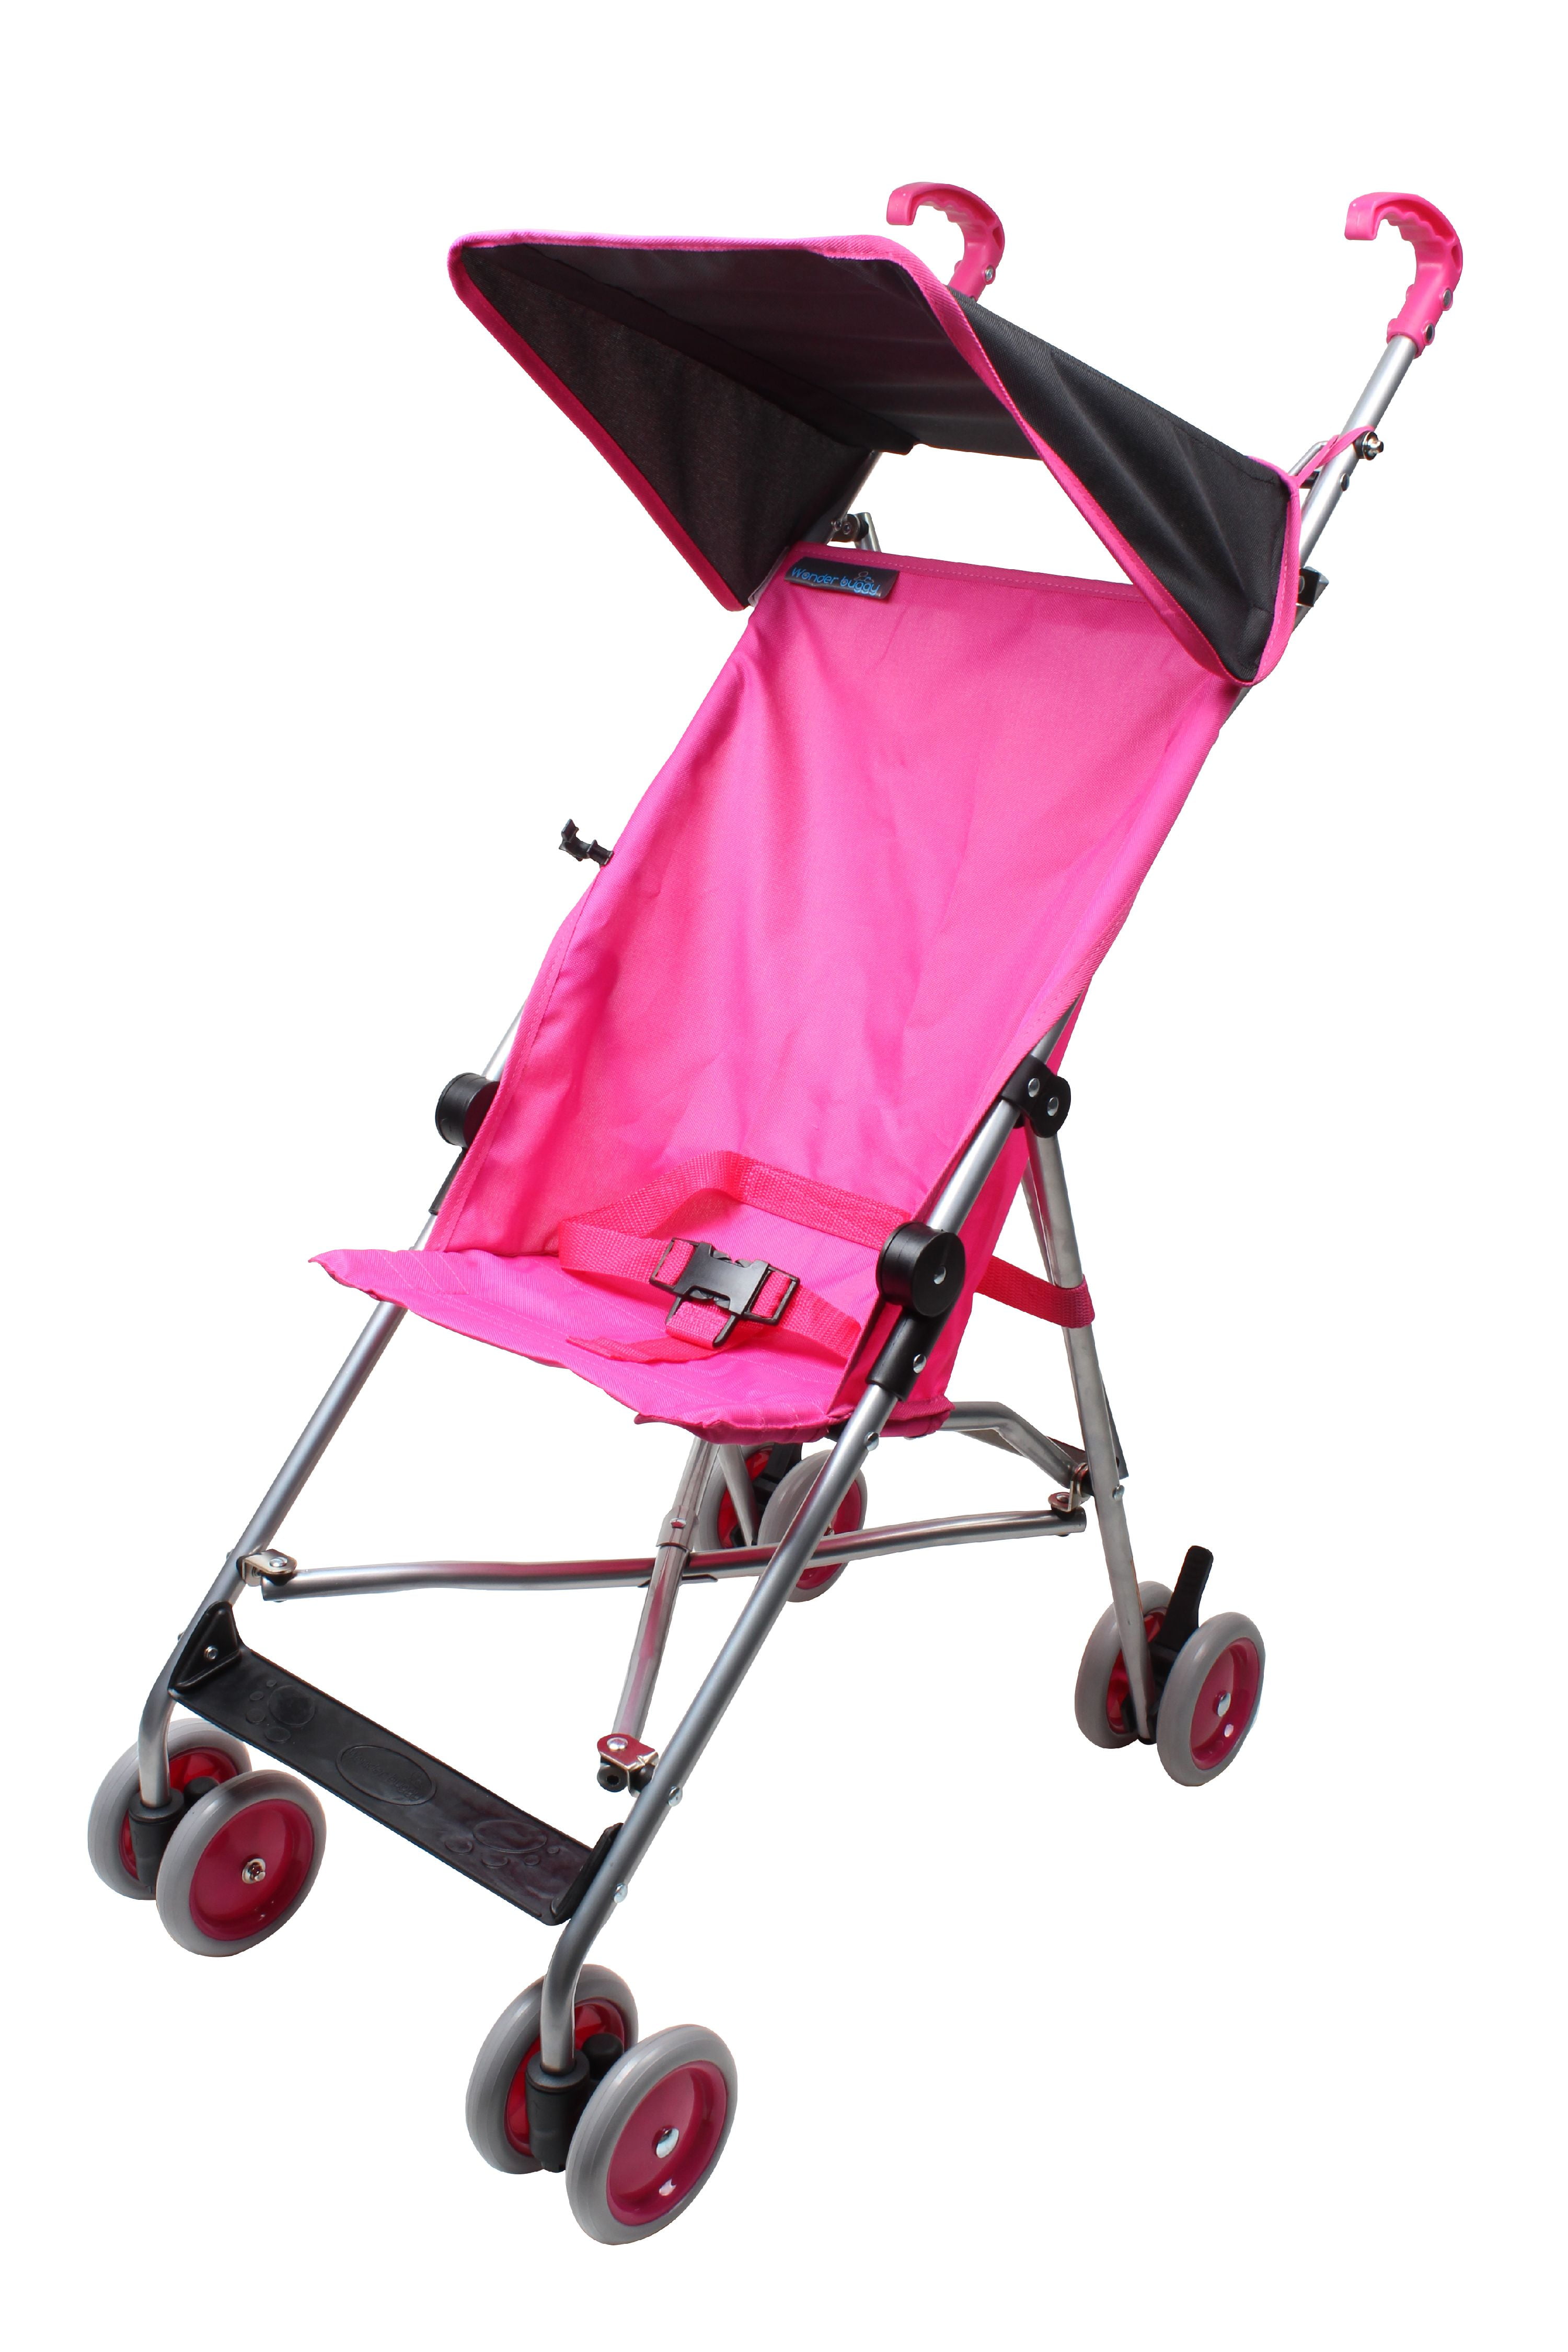 pink buggy